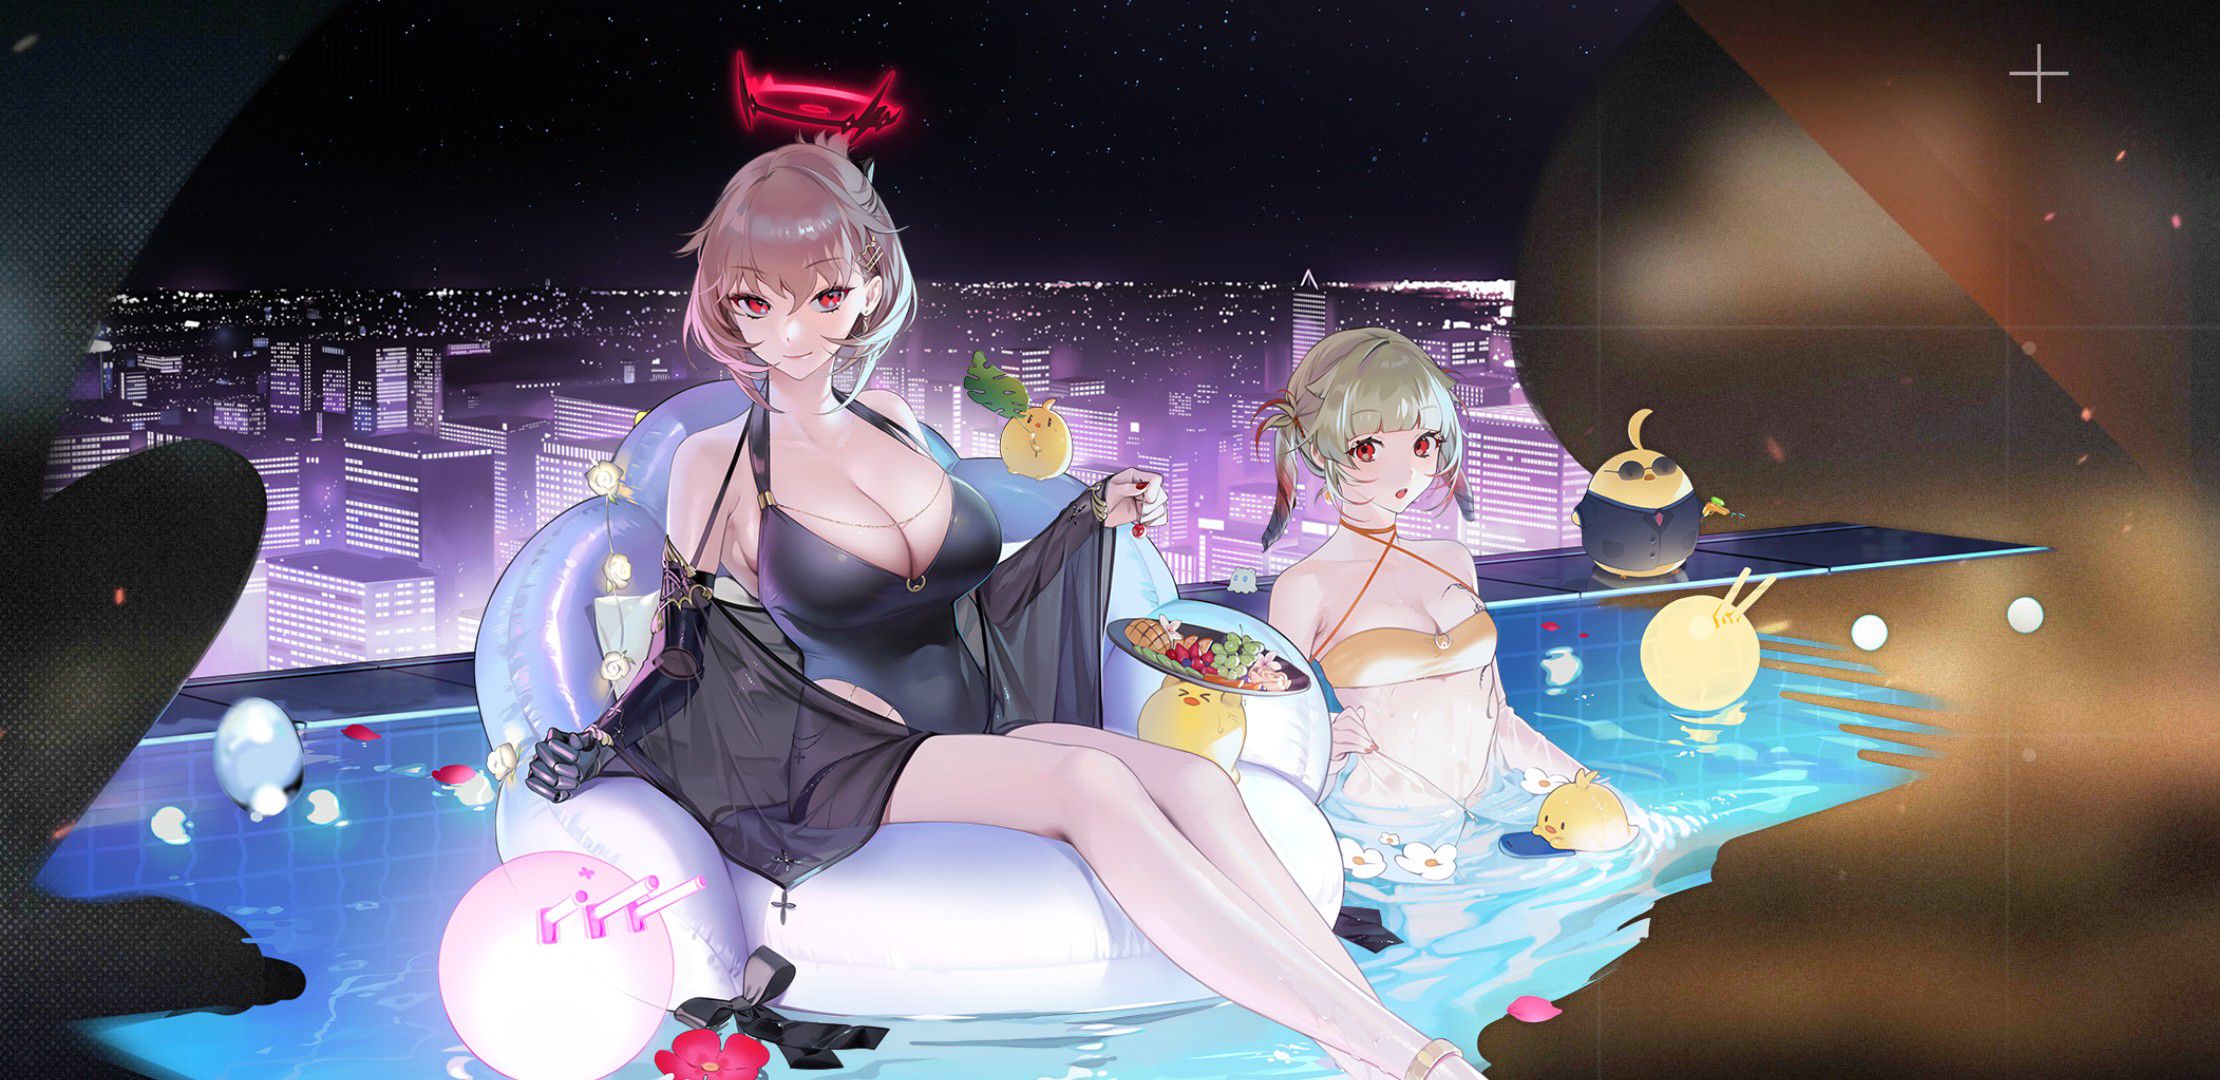 【There is an image】 Smartphone that urges charging with erotic swimsuits is malicious 27